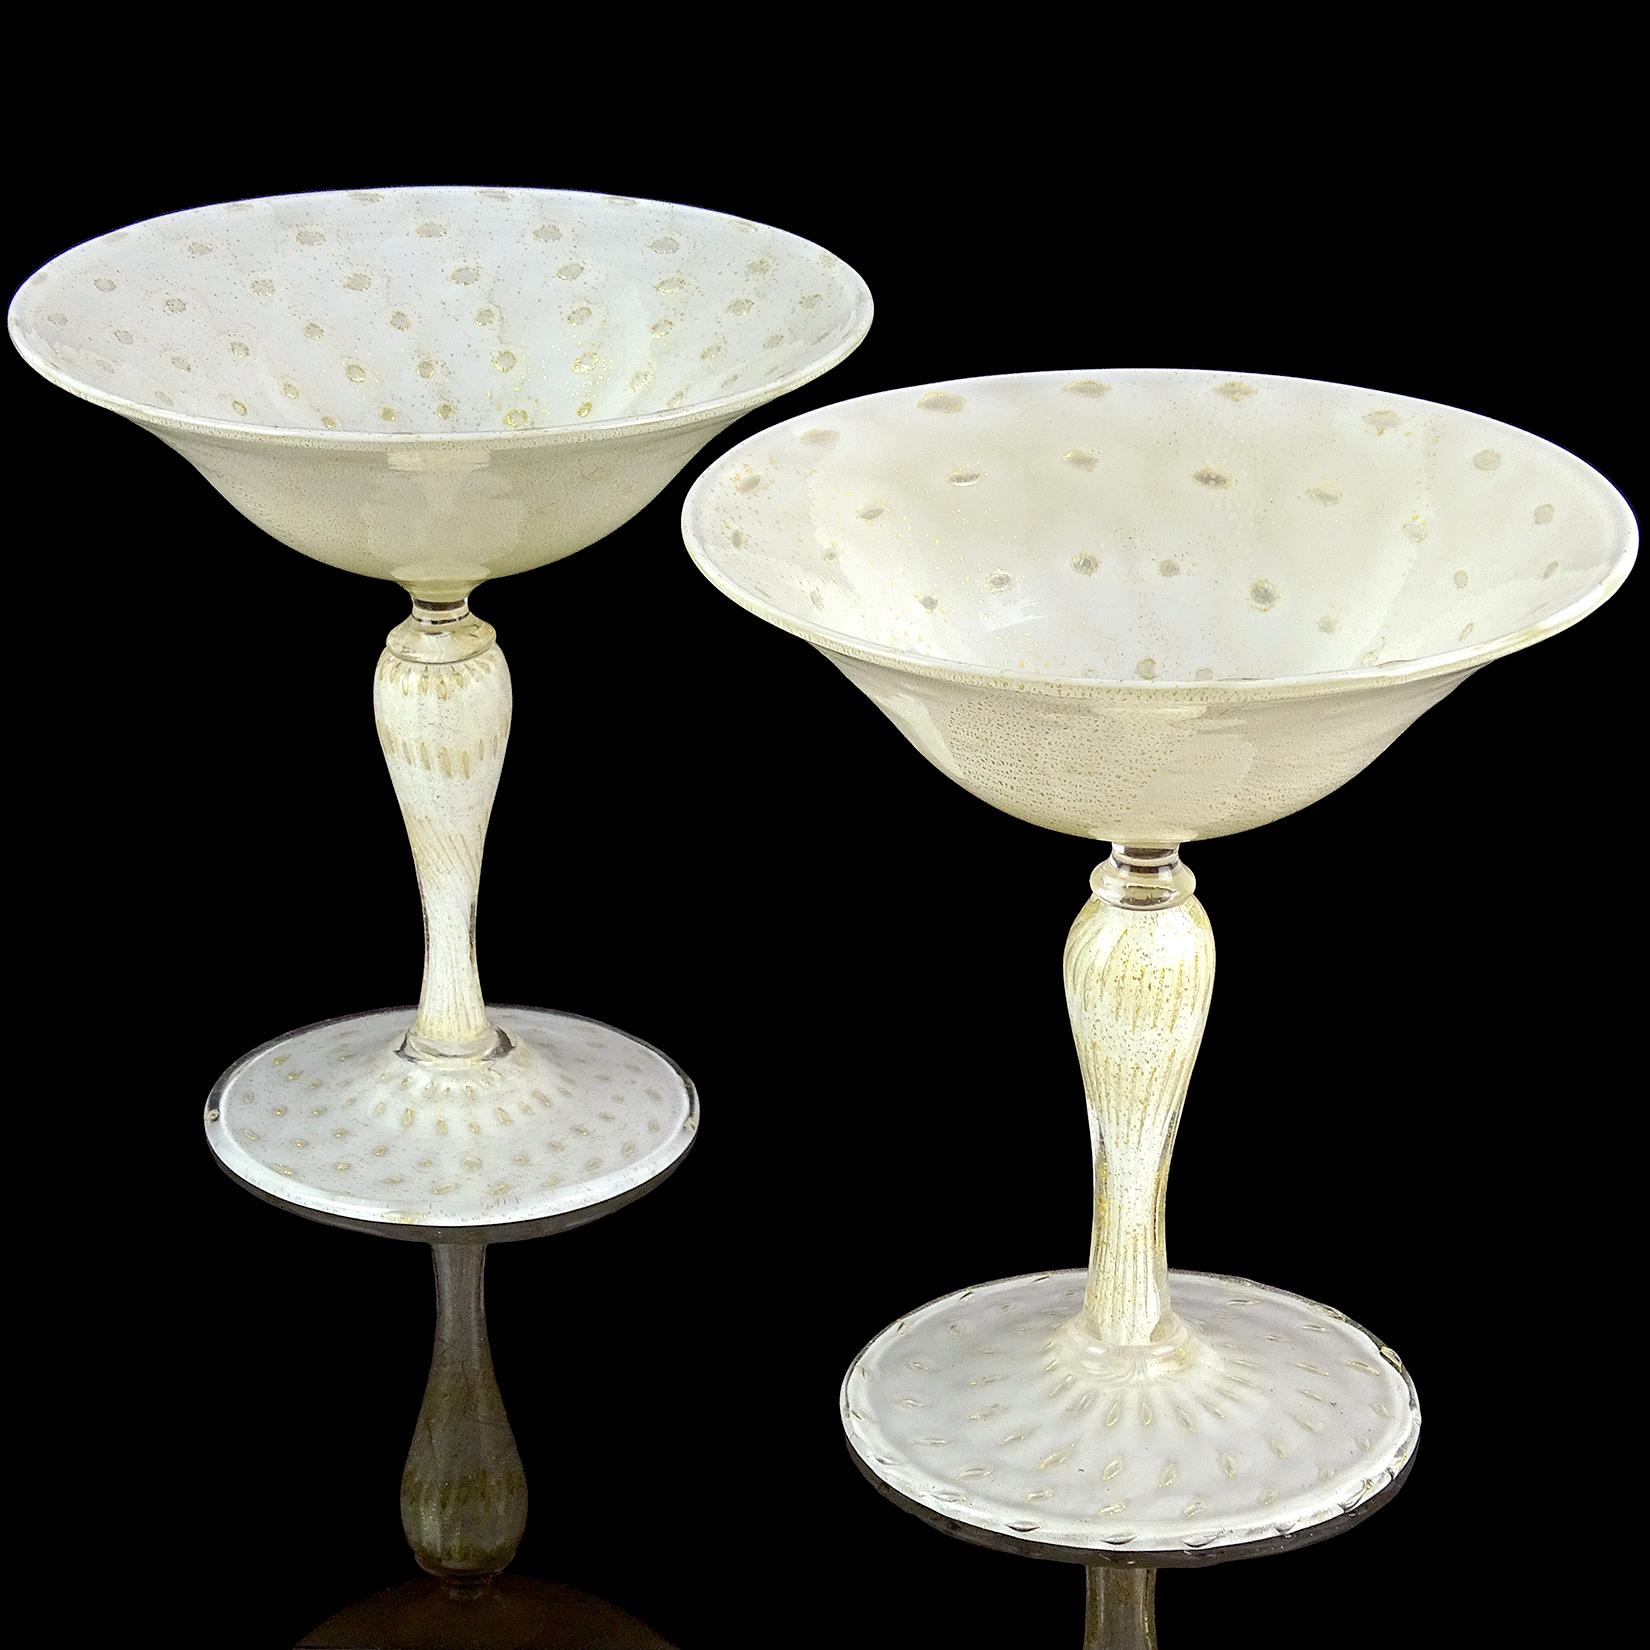 Priced per item (2 available as shown). Beautiful vintage Murano hand blown white, controlled bubbles and gold flecks Italian art glass pedestal compote bowl. Documented to designer Alfredo Barbini for Salviati, circa 1950s. Profusely covered in